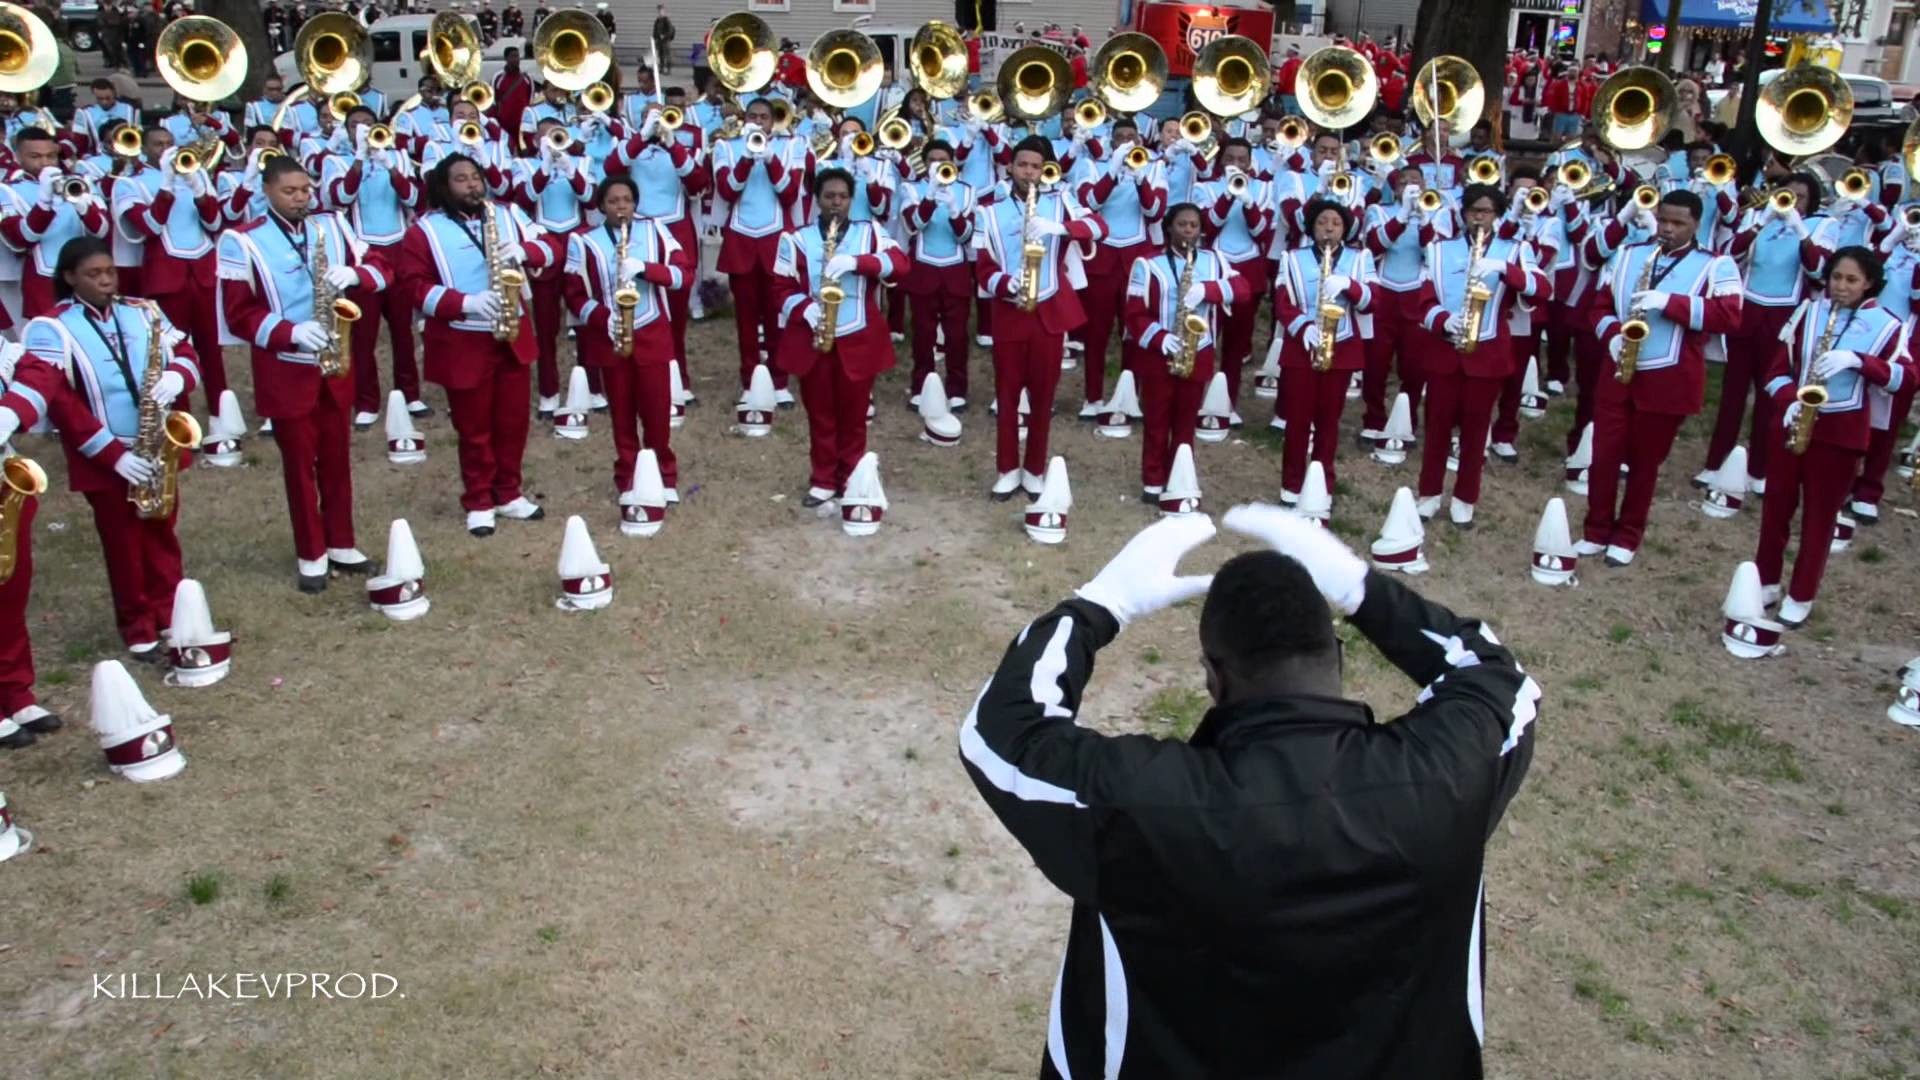 1920x1080 Talladega College Marching Band - Across 110th Street @ 2015 Hermes Parade  - YouTube